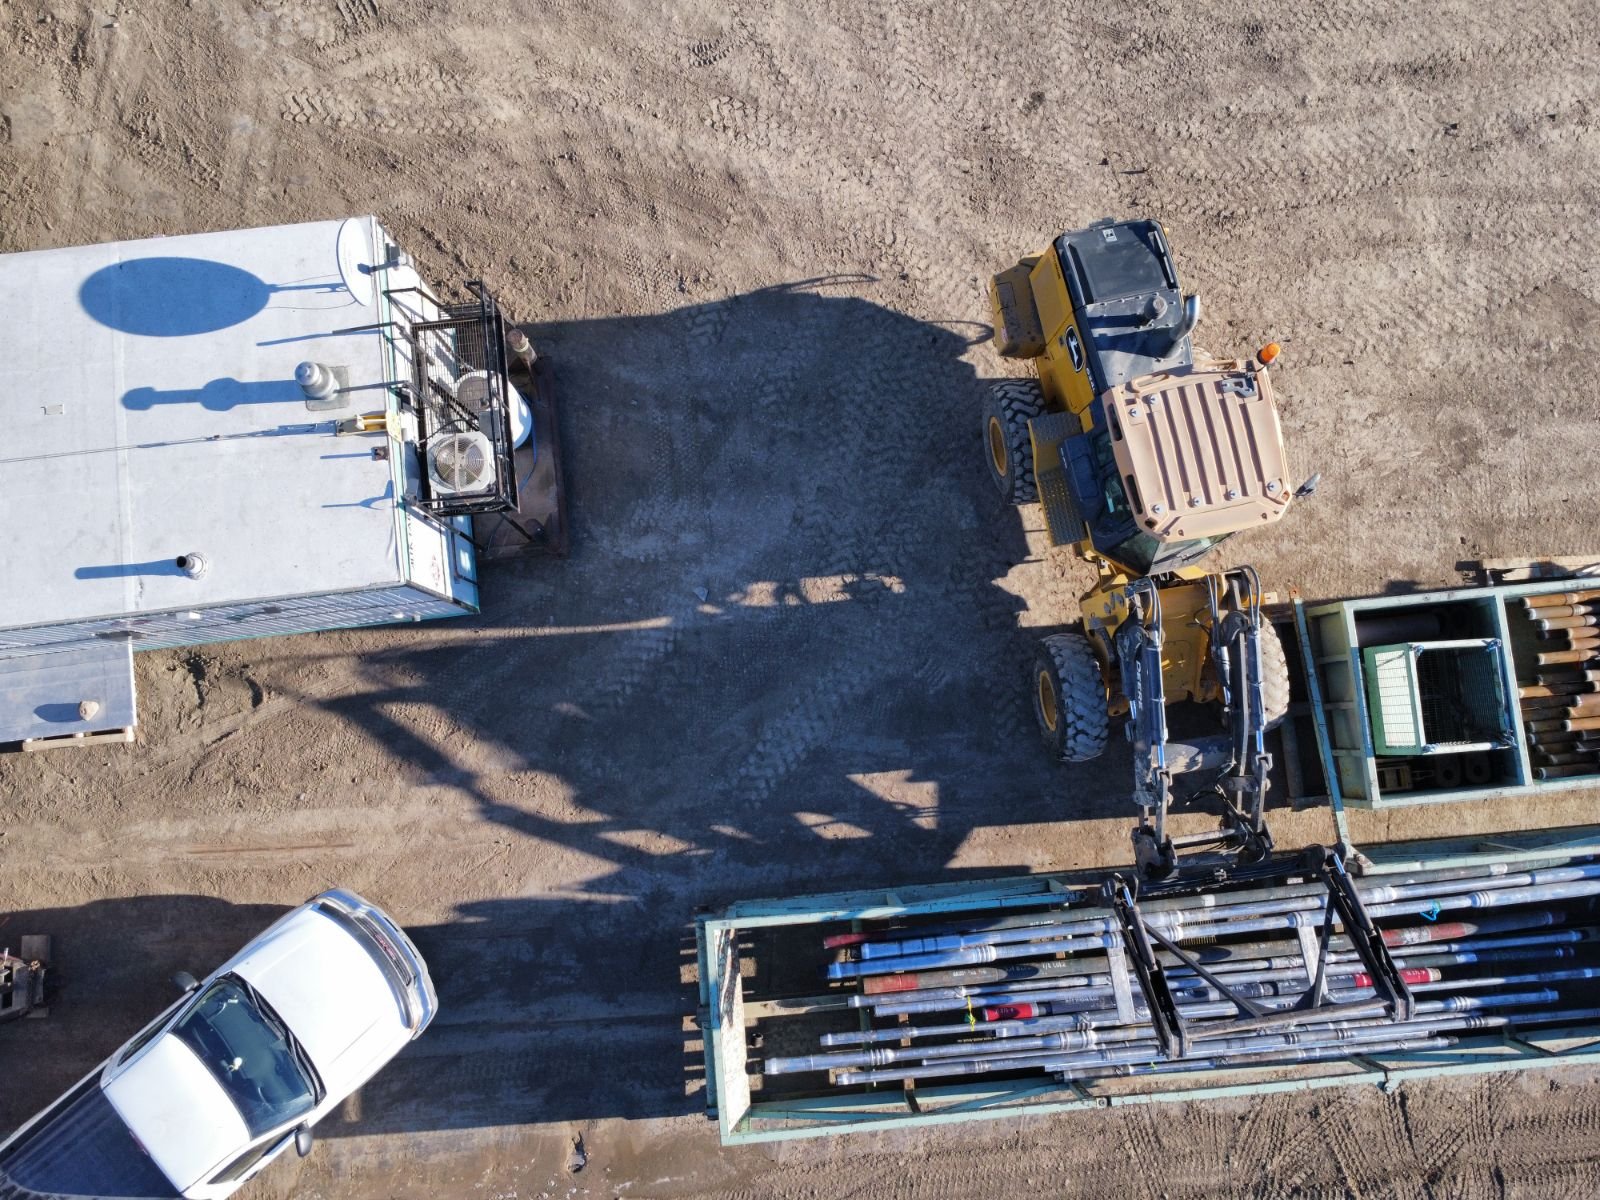  Since commencement of production, the well has exhibited CHOPs, Cold Heavy Oil Production with sand, producing foamy oil with greater than 10% sand cuts and high initial gas pressures. 